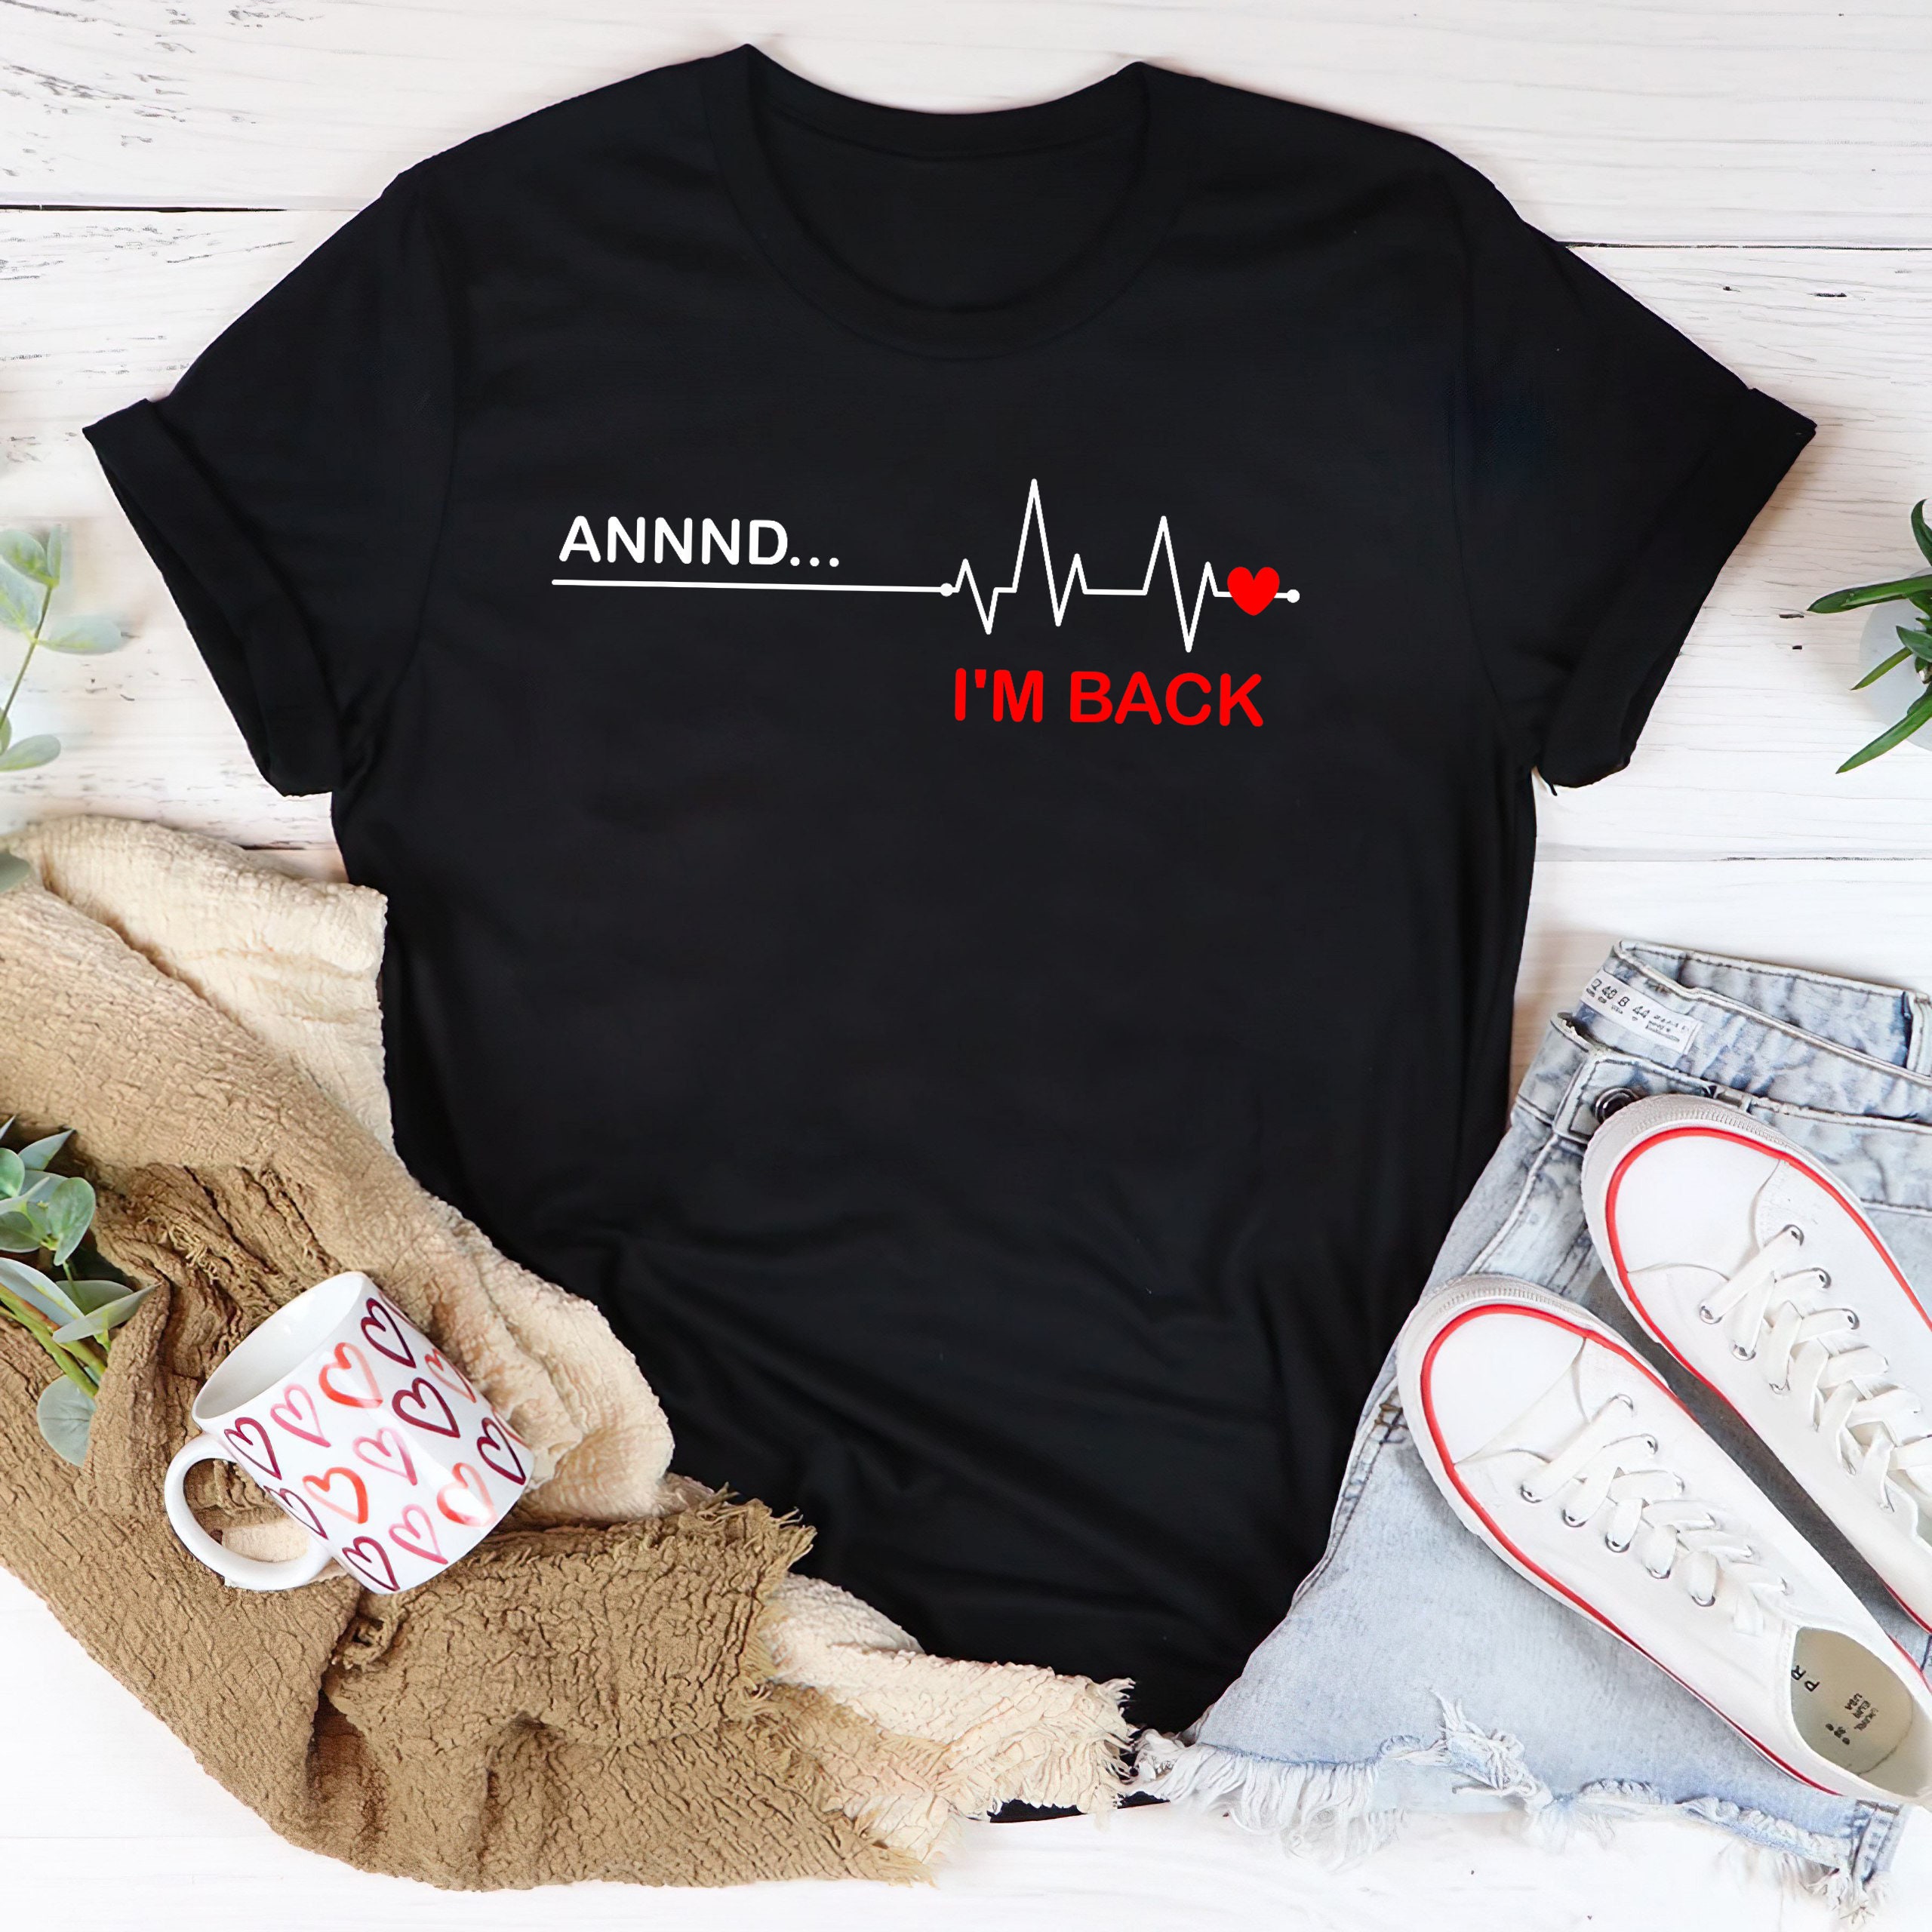 t-shirt to cover surgical incision? 